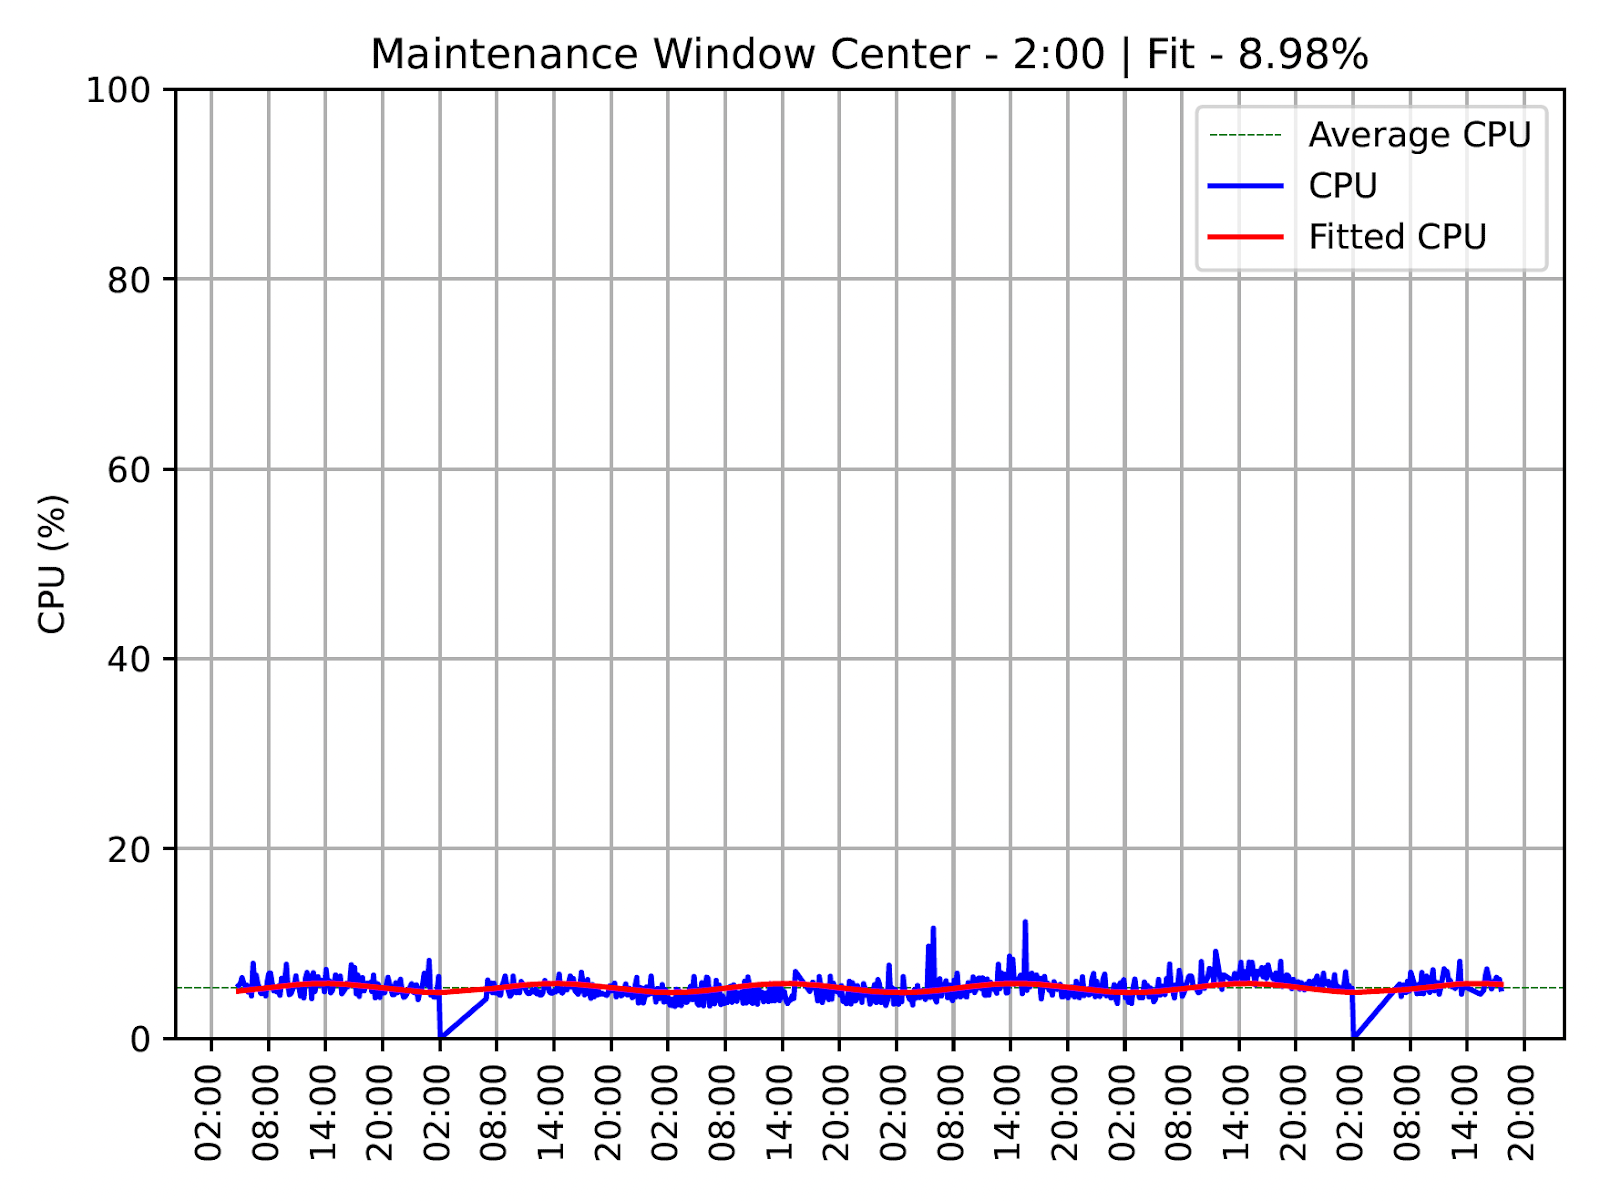 This data center has no low-traffic periods.